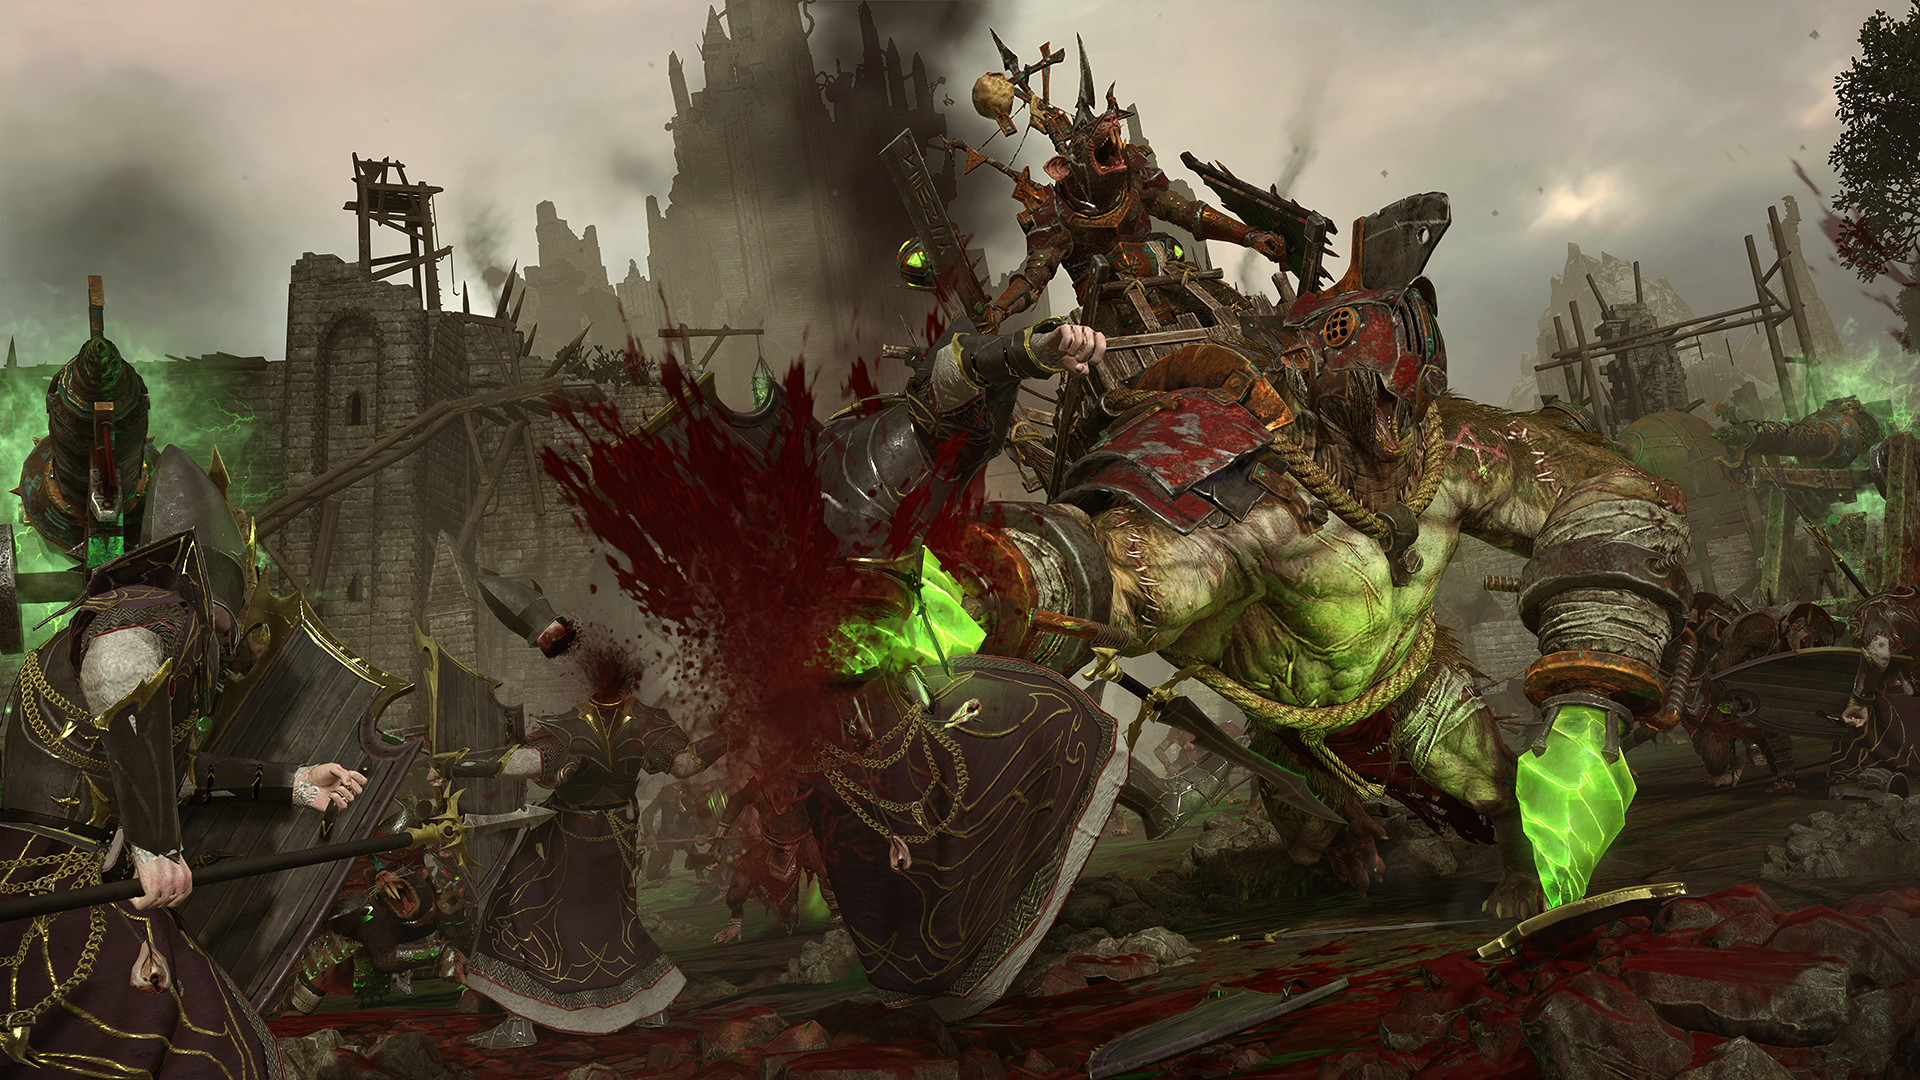 A Skaven kills an enemy unit in a gory fashion from the Blood Pack Warhammer 3 DLC